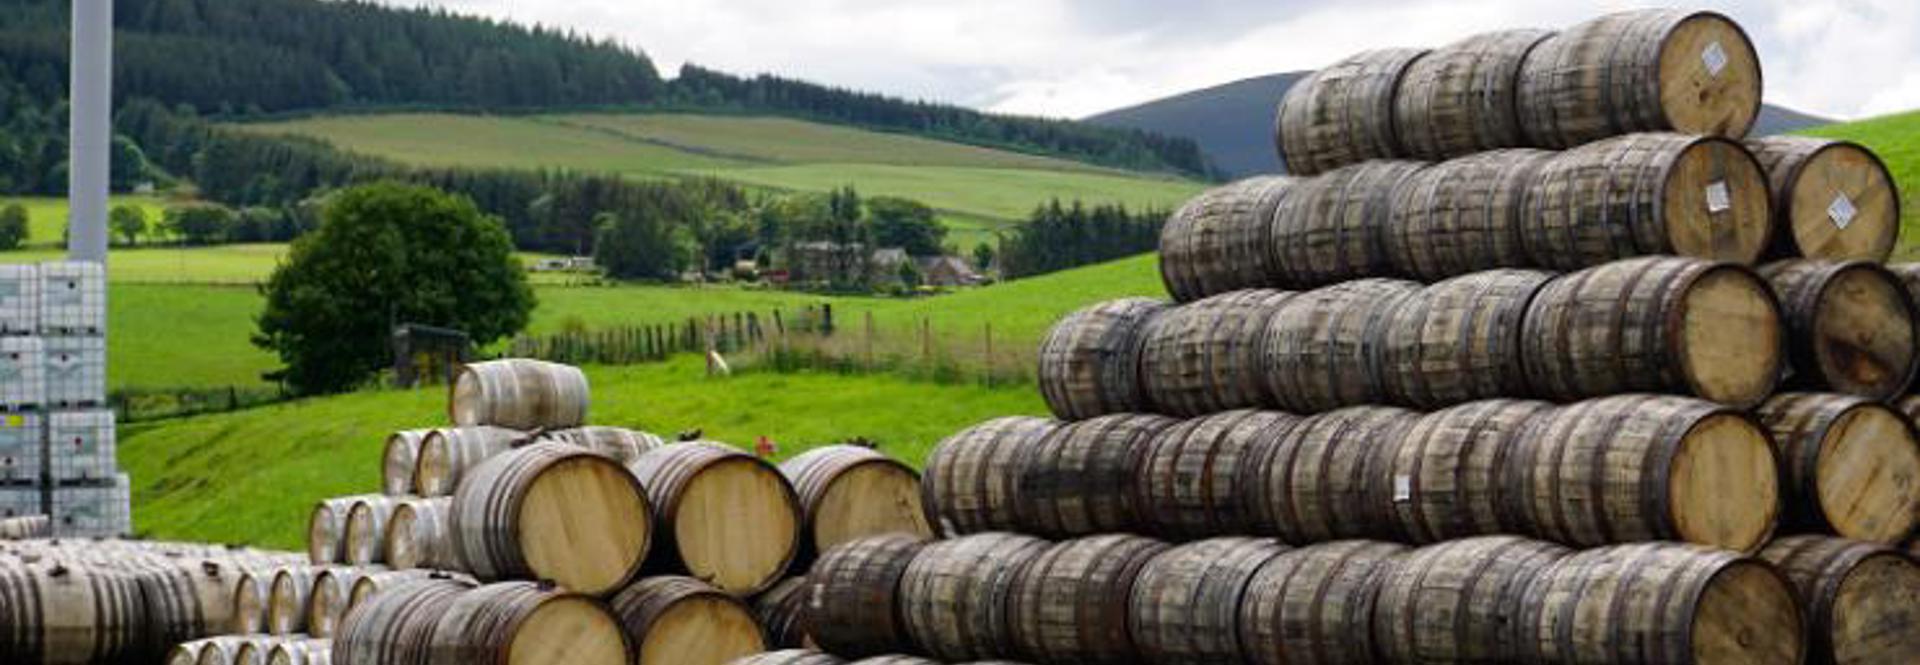 Whisky Cask Ownership Guide - Cask Trade